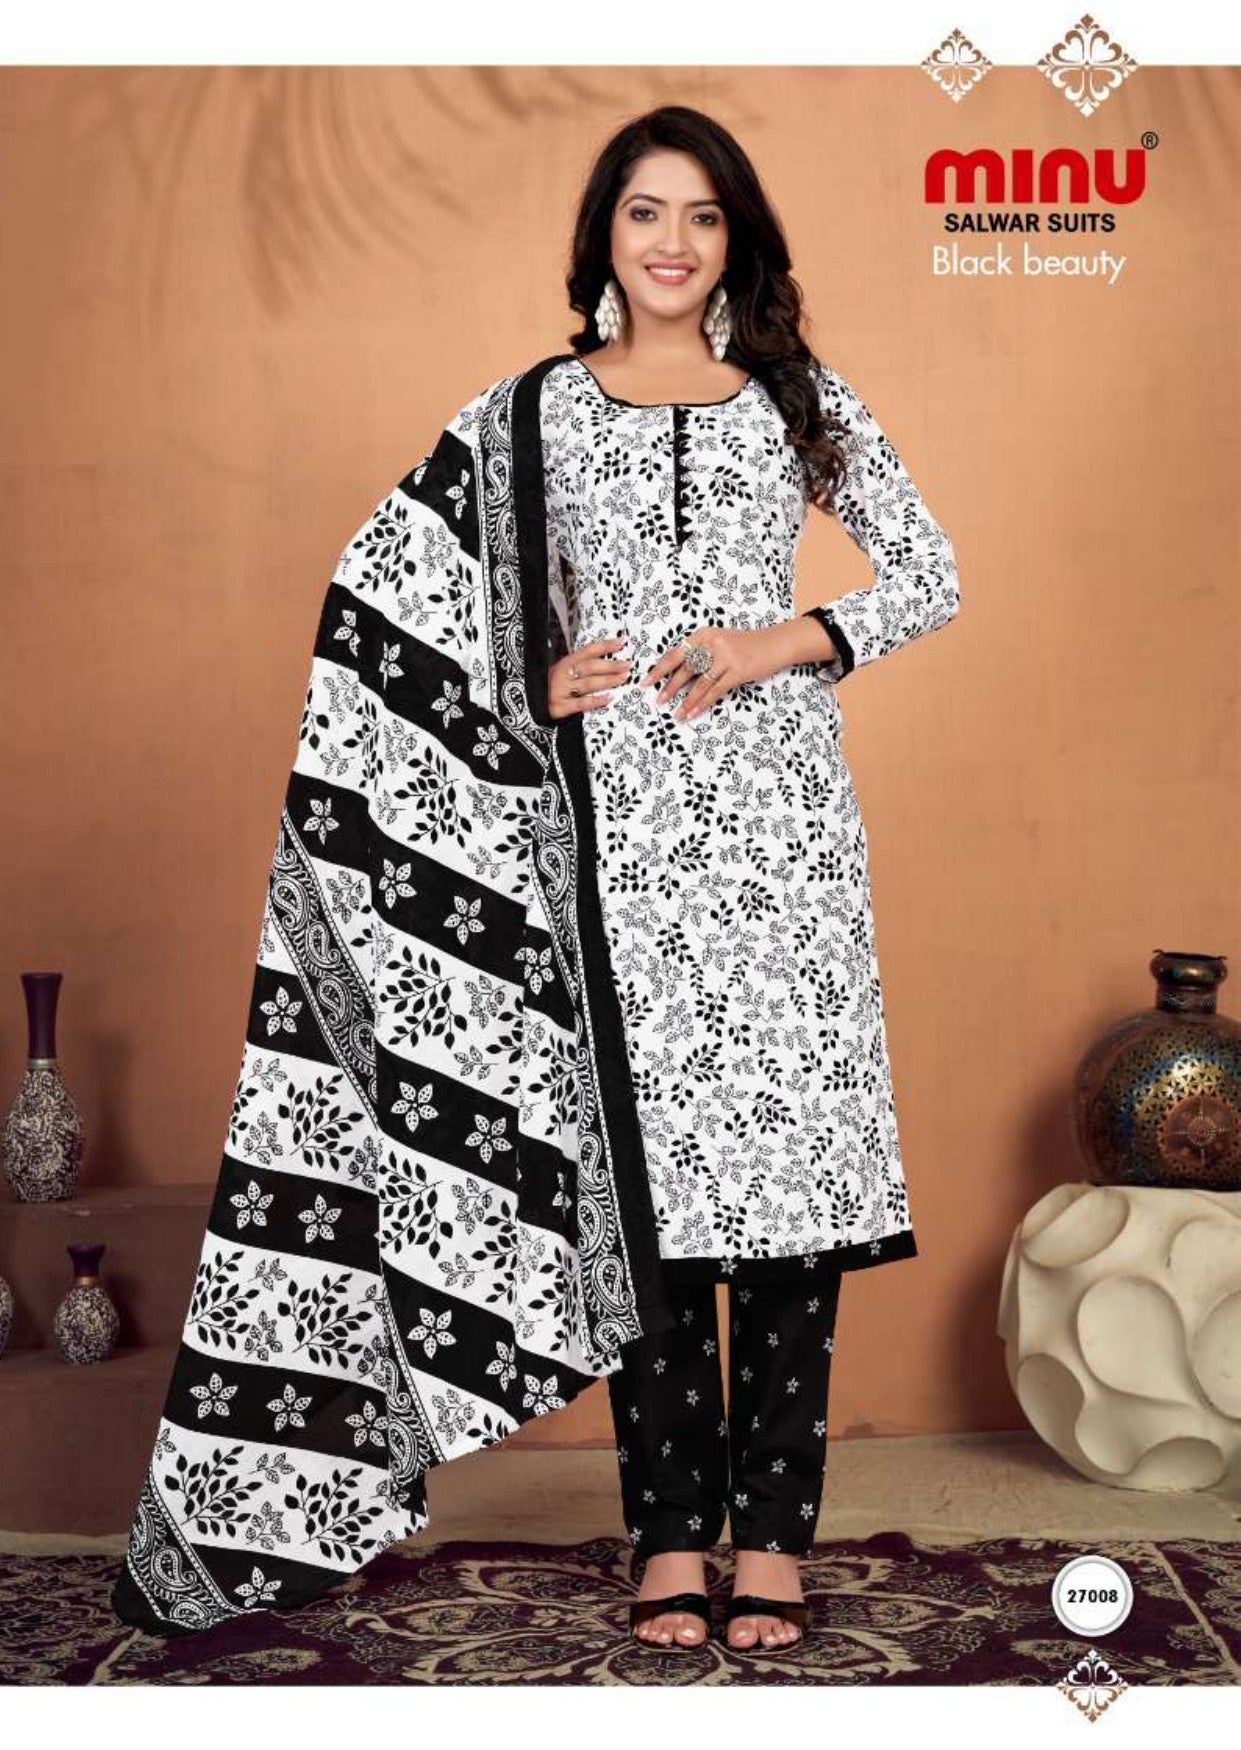 Top-quality printed salwar suit for retail at low prices 